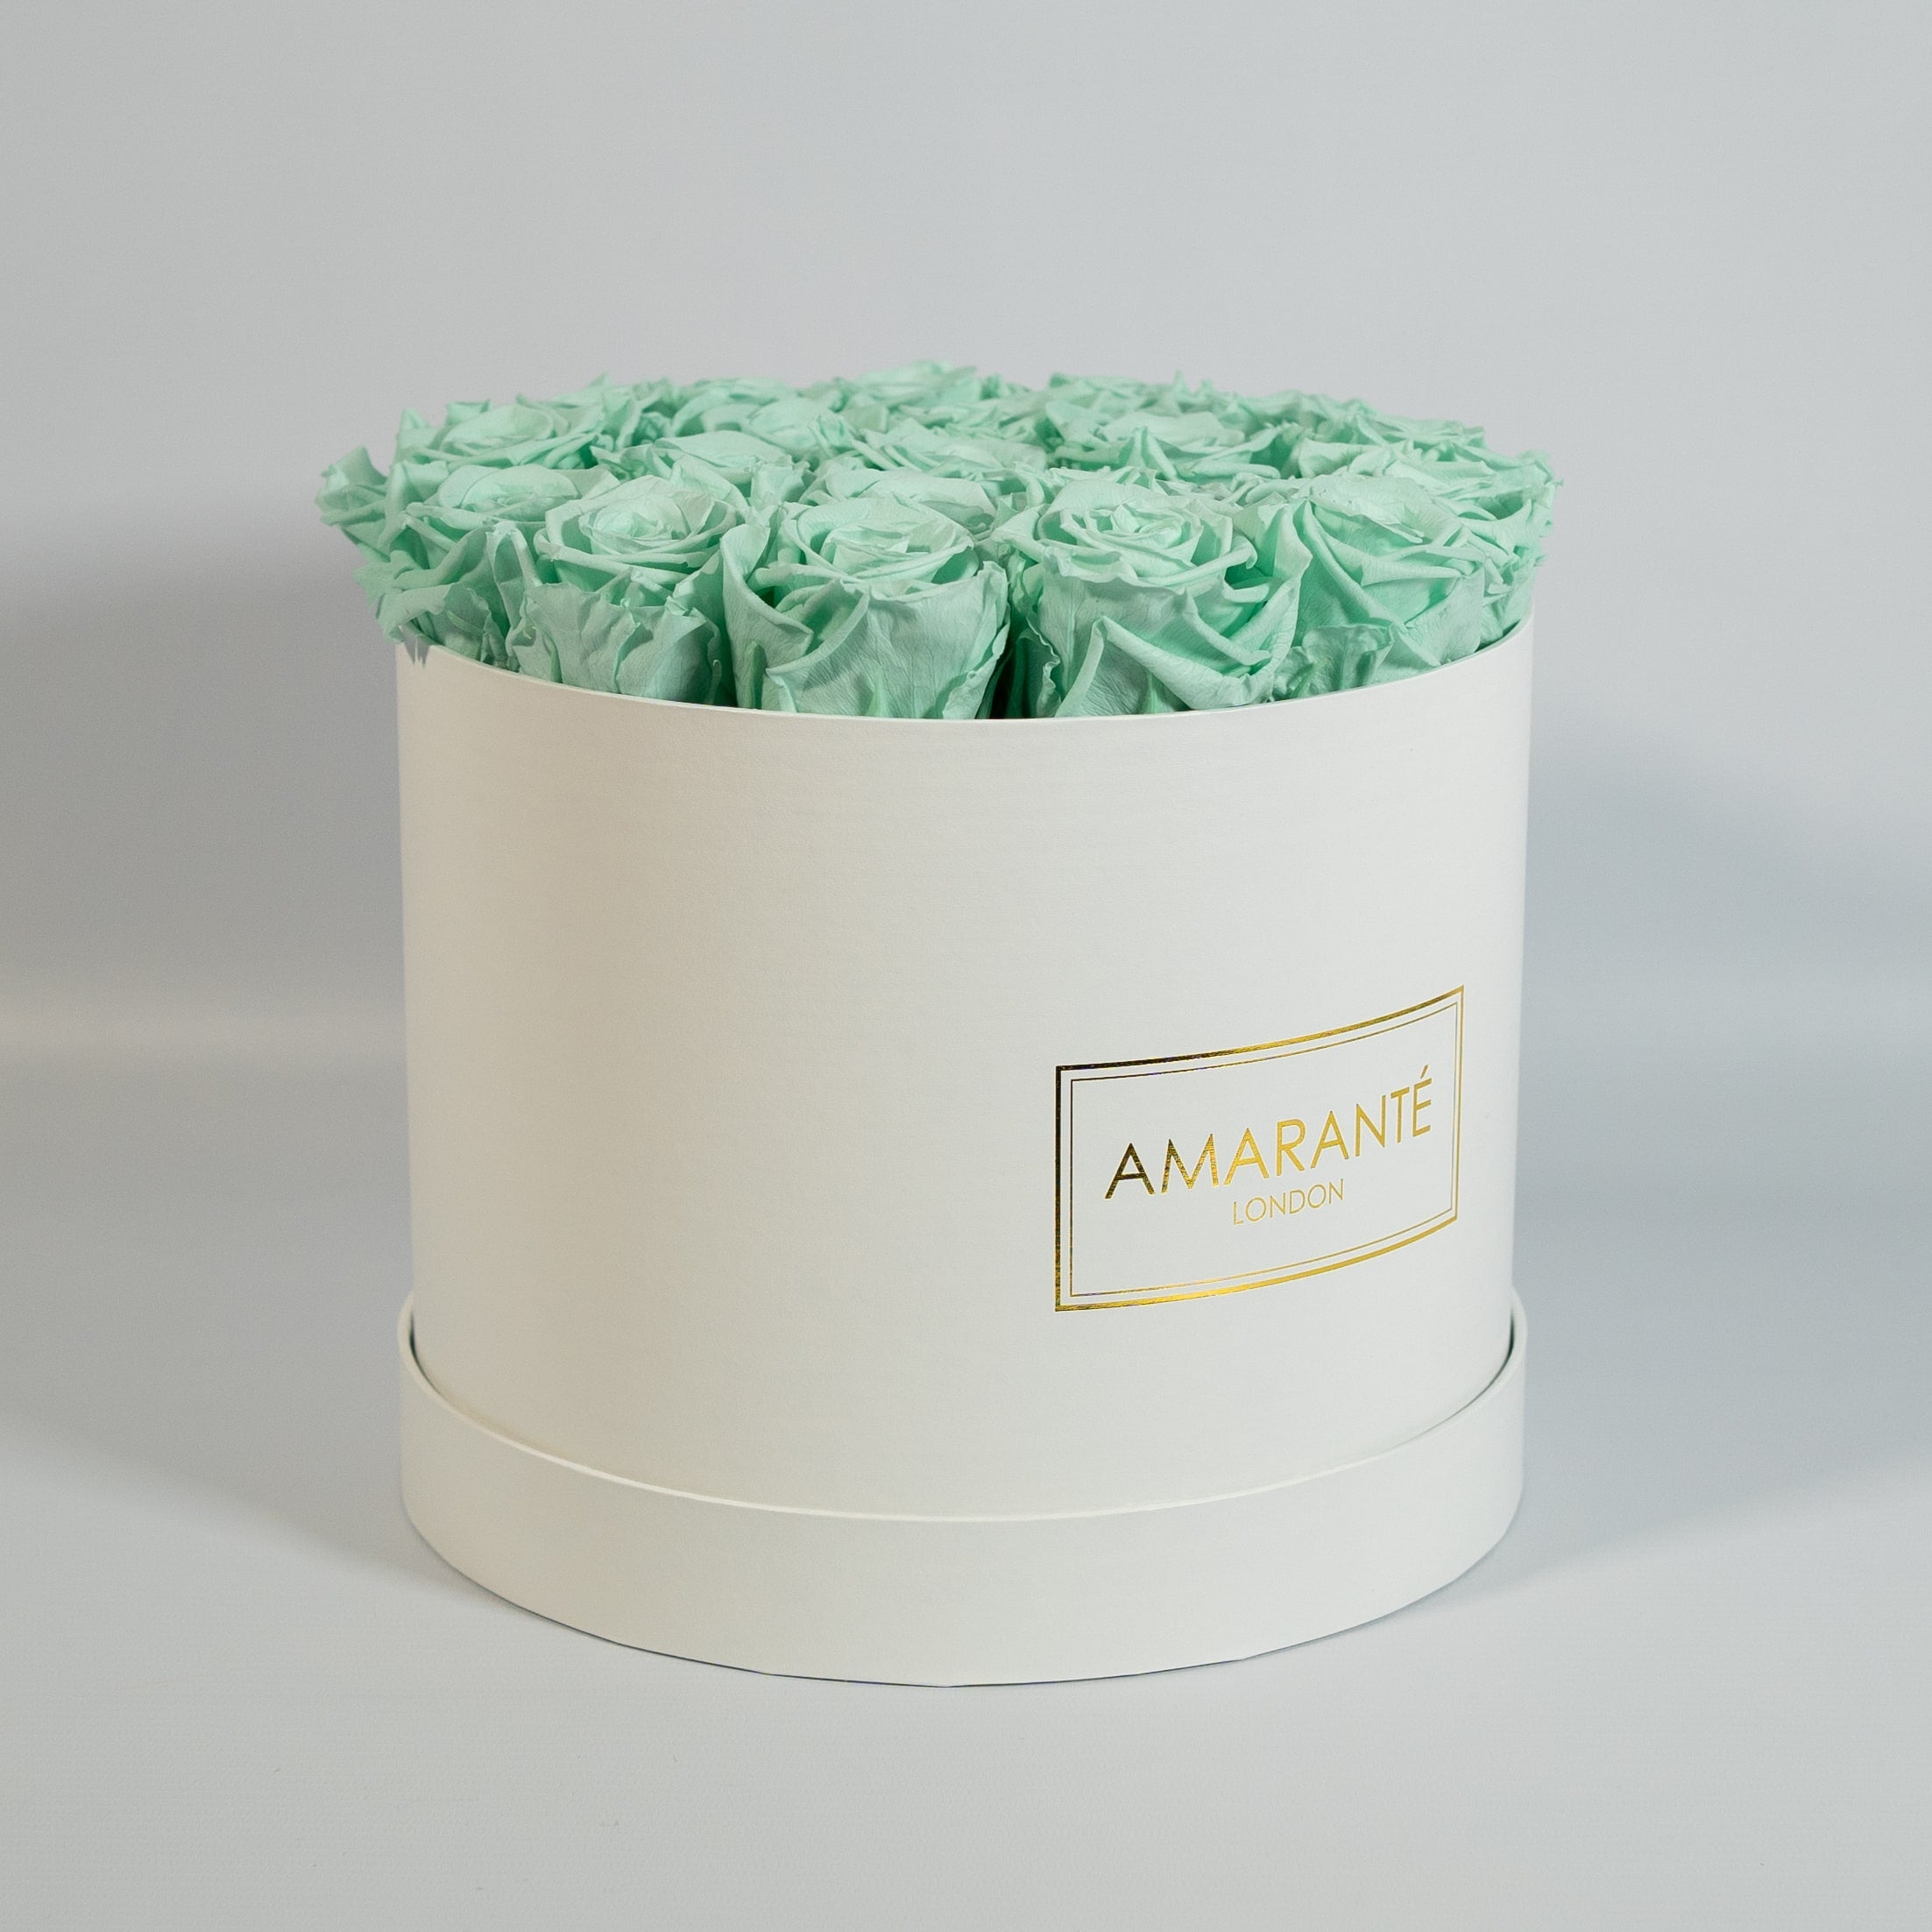 revitalsing mint green roses featured in a chic white large box 